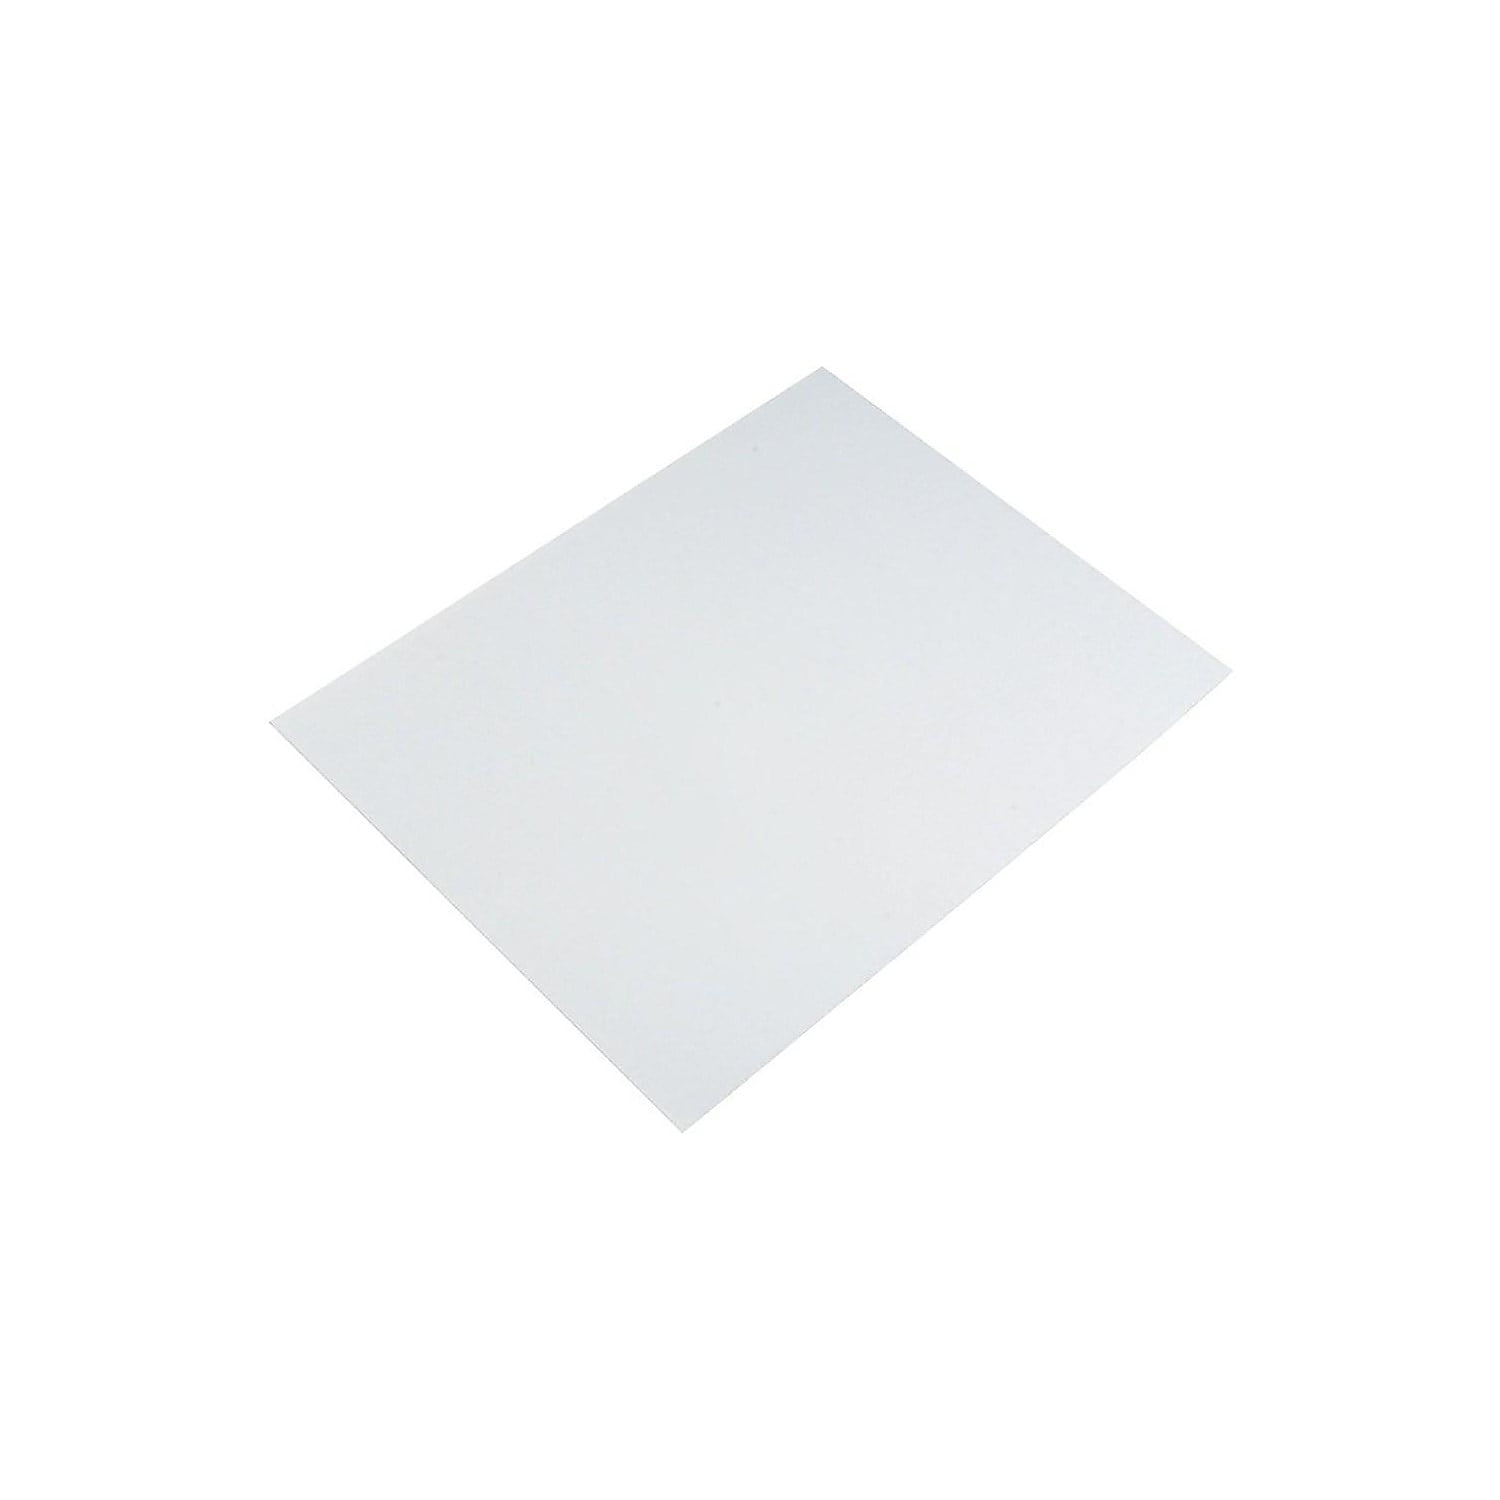 Four-Ply Poster Board, 28 x 22, White, 25/Carton, Sold as 25 Each